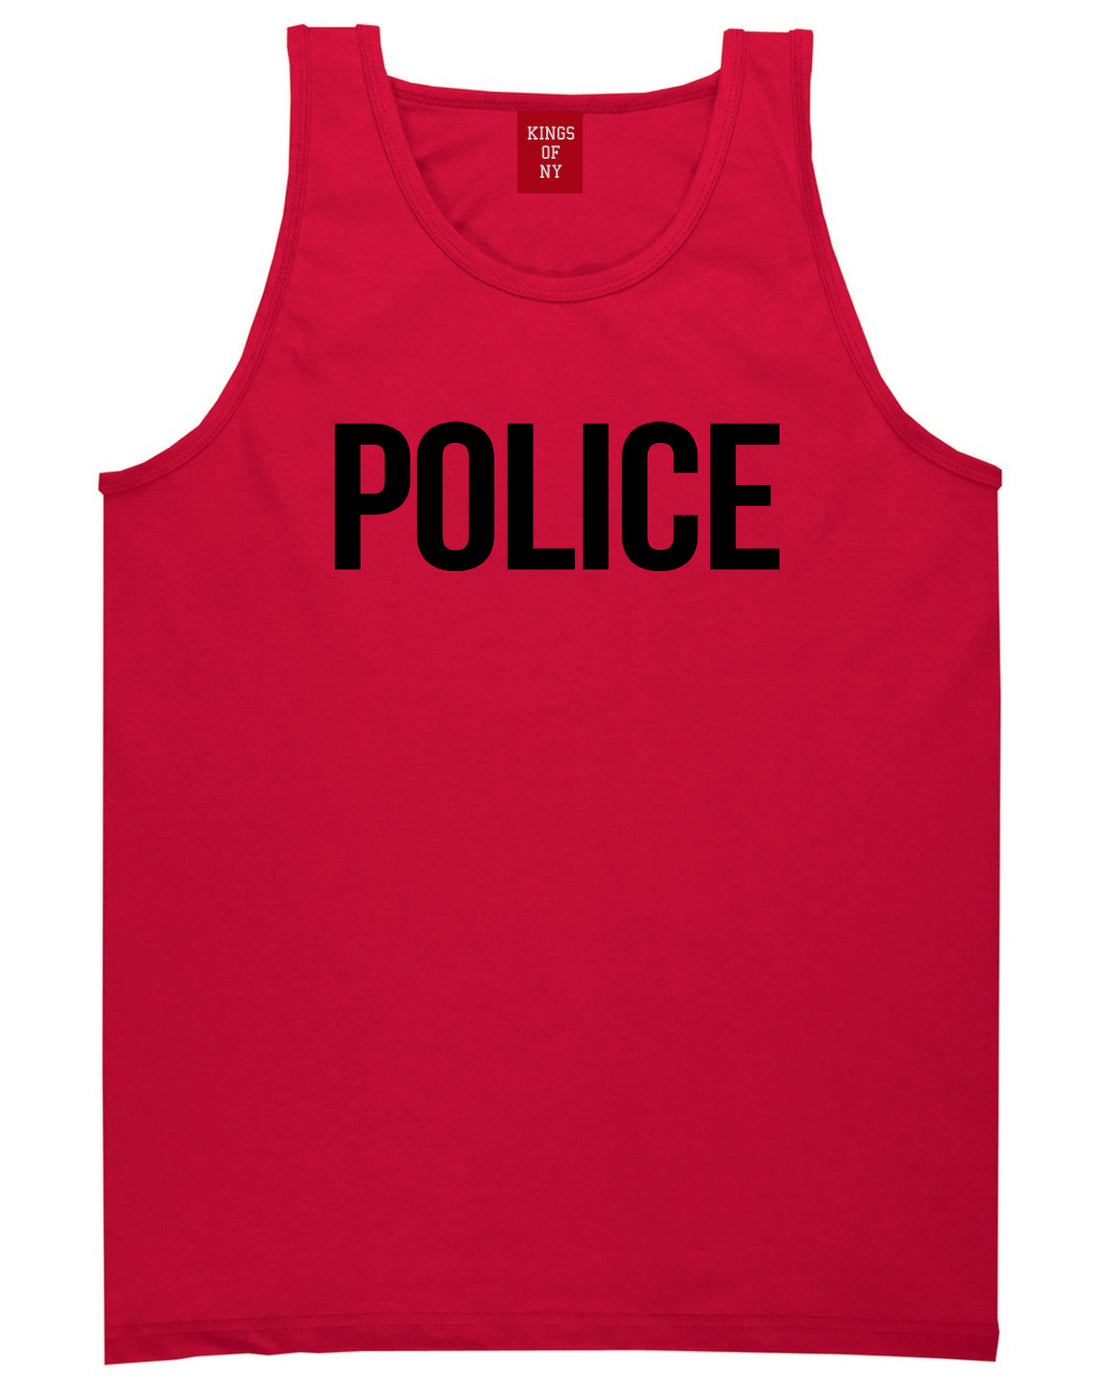 Police Uniform Cop Costume Mens Tank Top Shirt Red by Kings Of NY